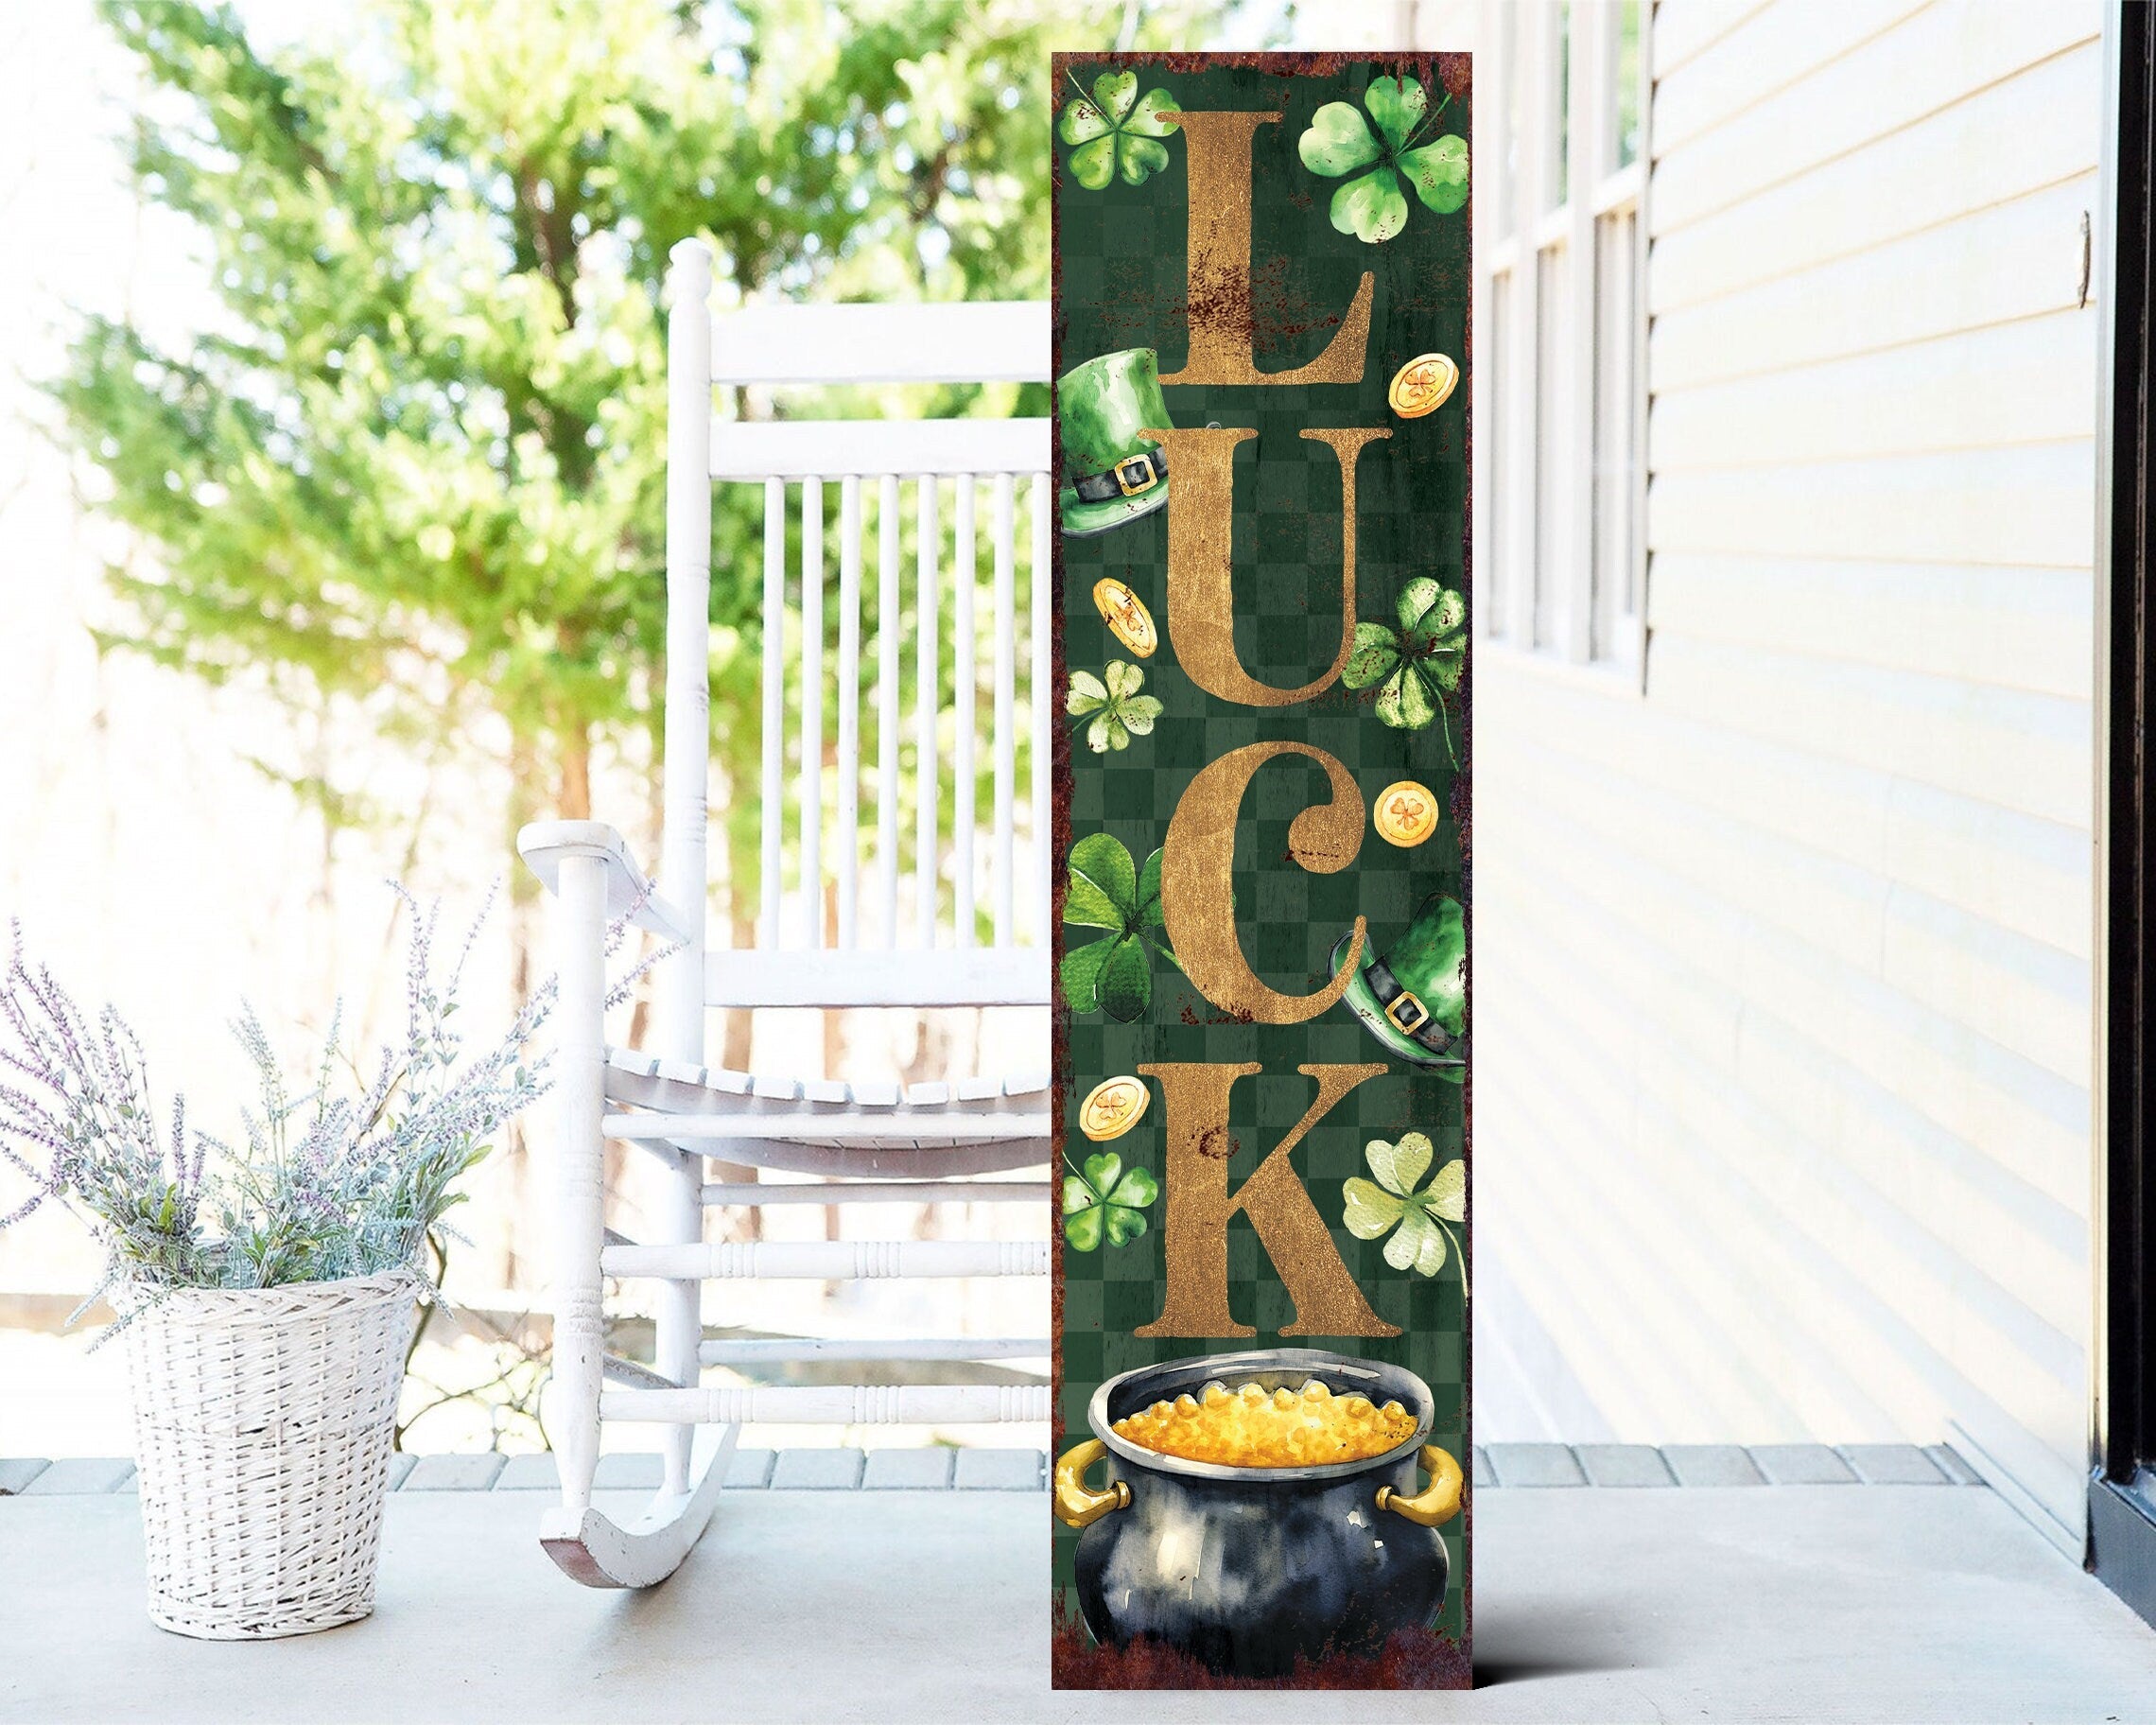 36-Inch-Rustic-Modern-Farmhouse-Entryway-St.Patrick's-Day-LUCK-Sign-for-Front-Porch,-Vintage-St.Patrick's-Outdoor-Decor-for-Front-Door-